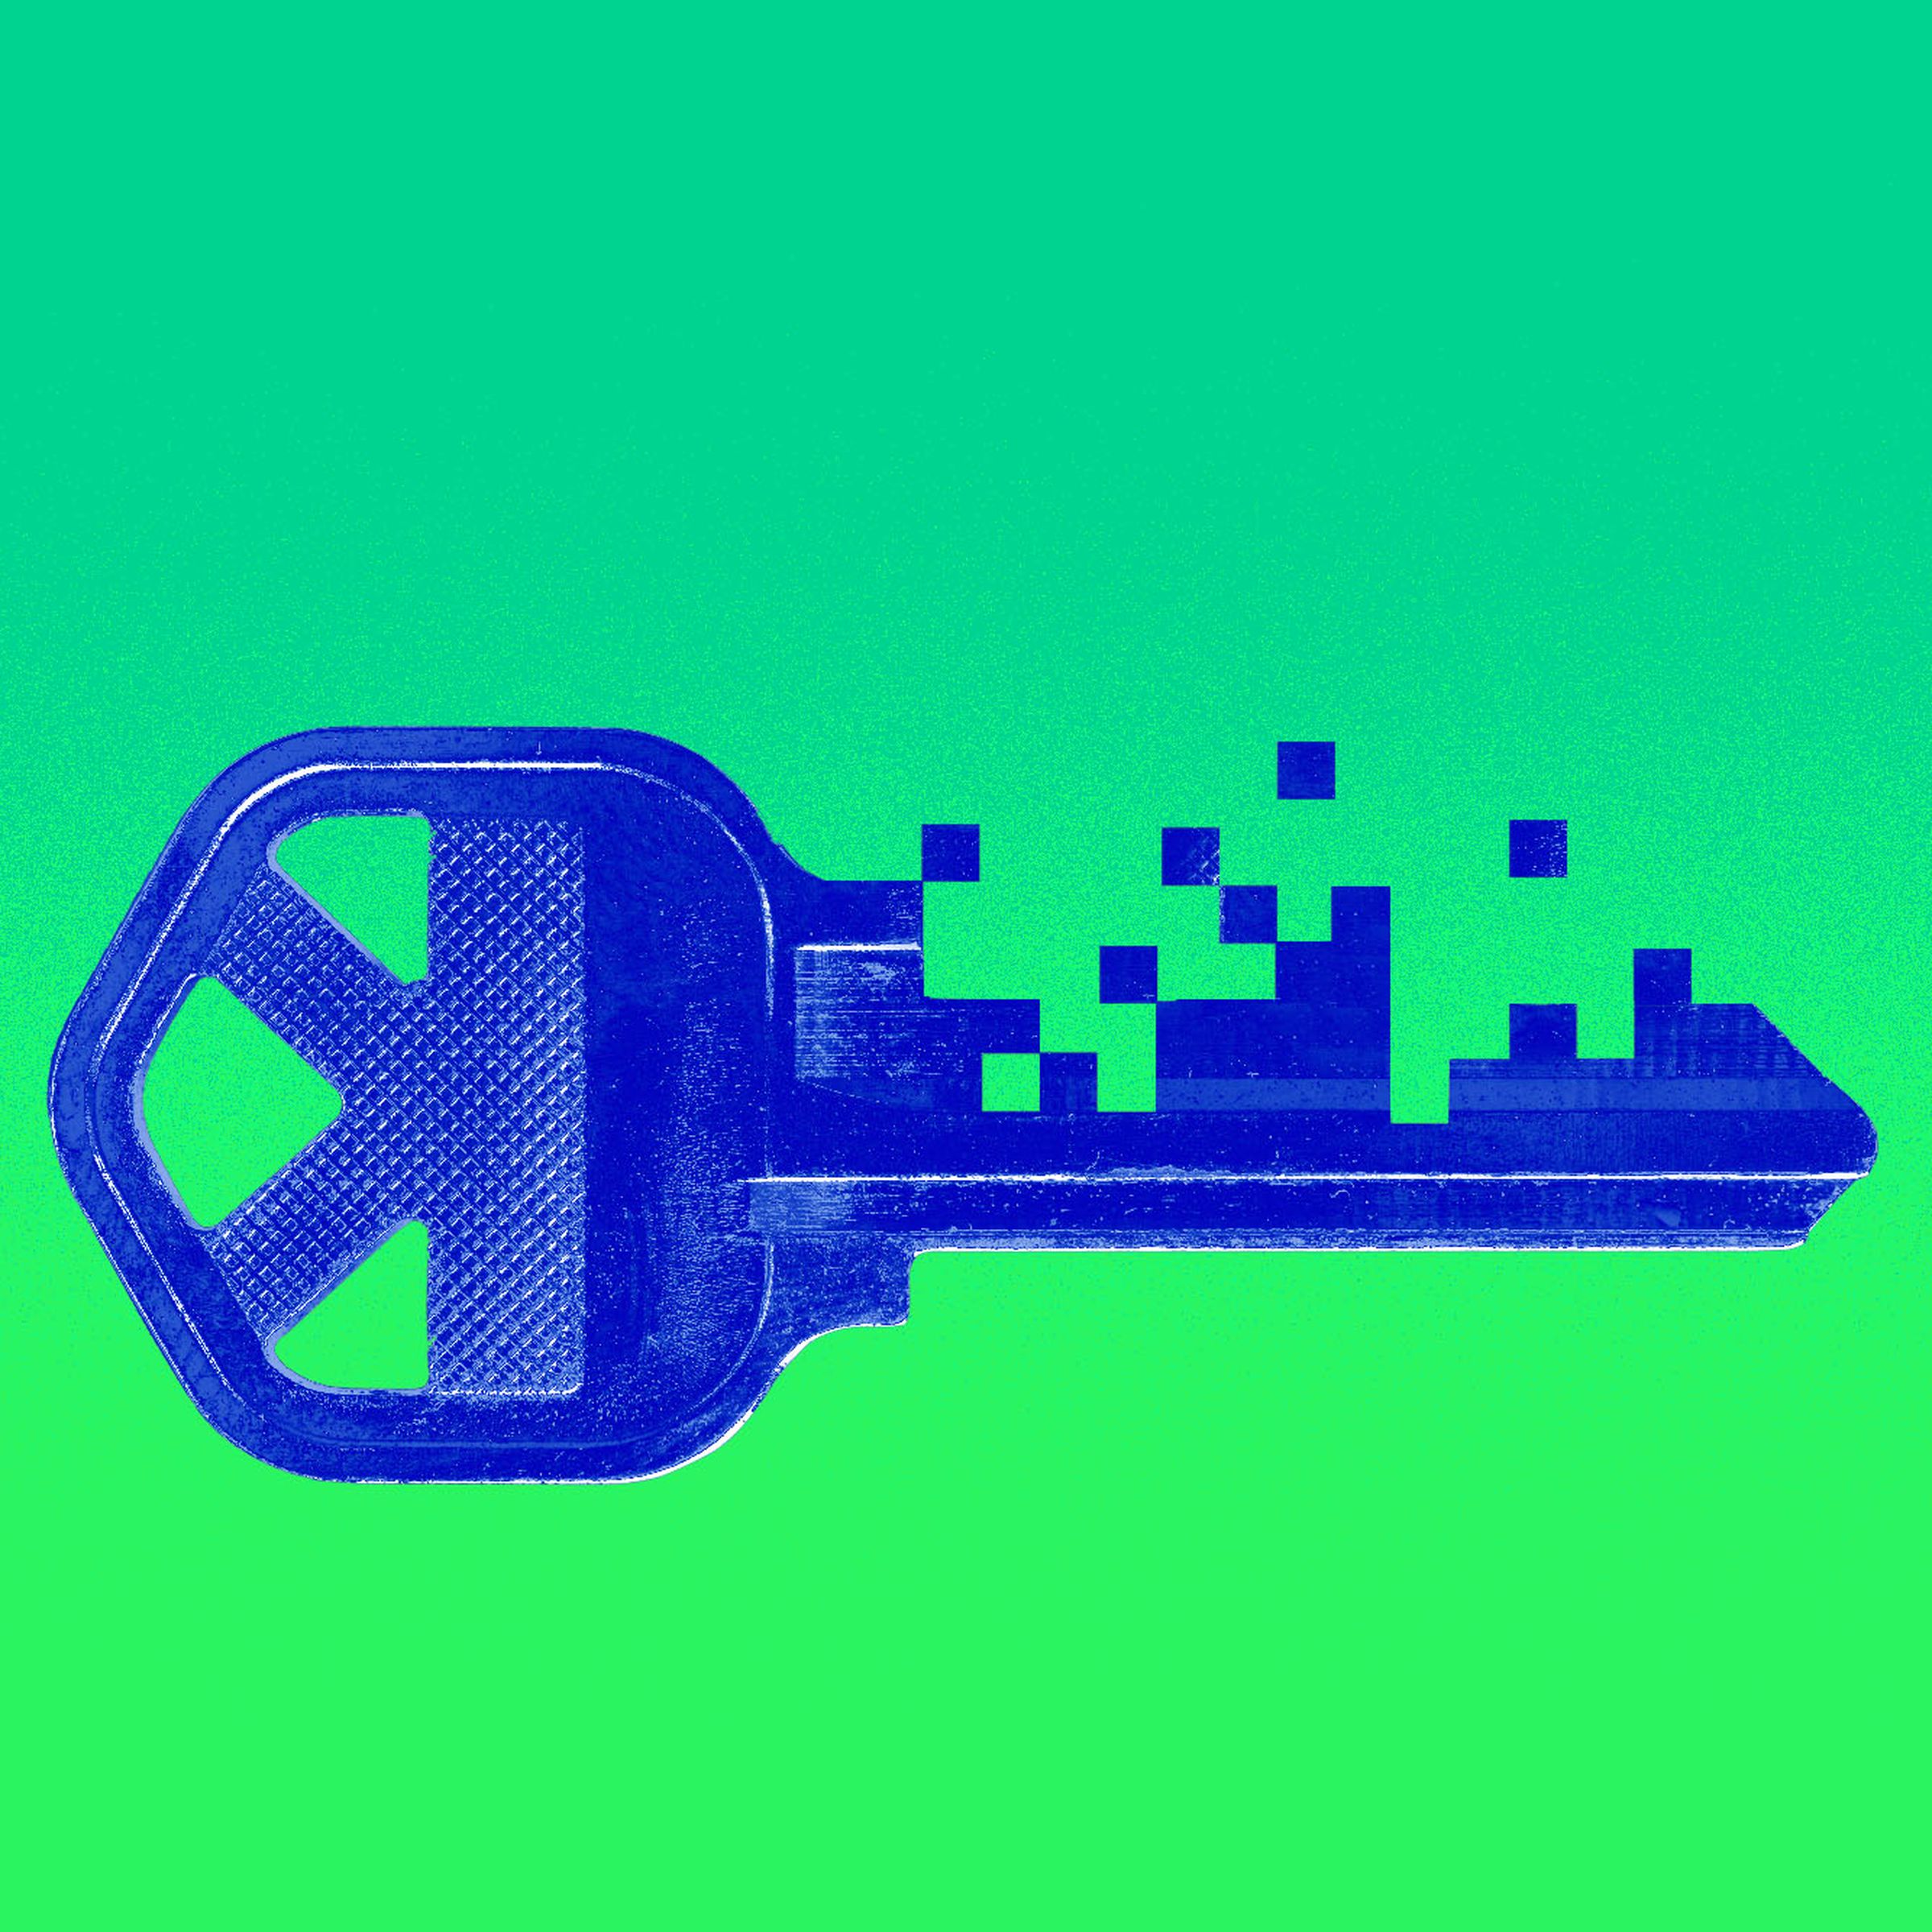 Illustration of a key being pixelated.